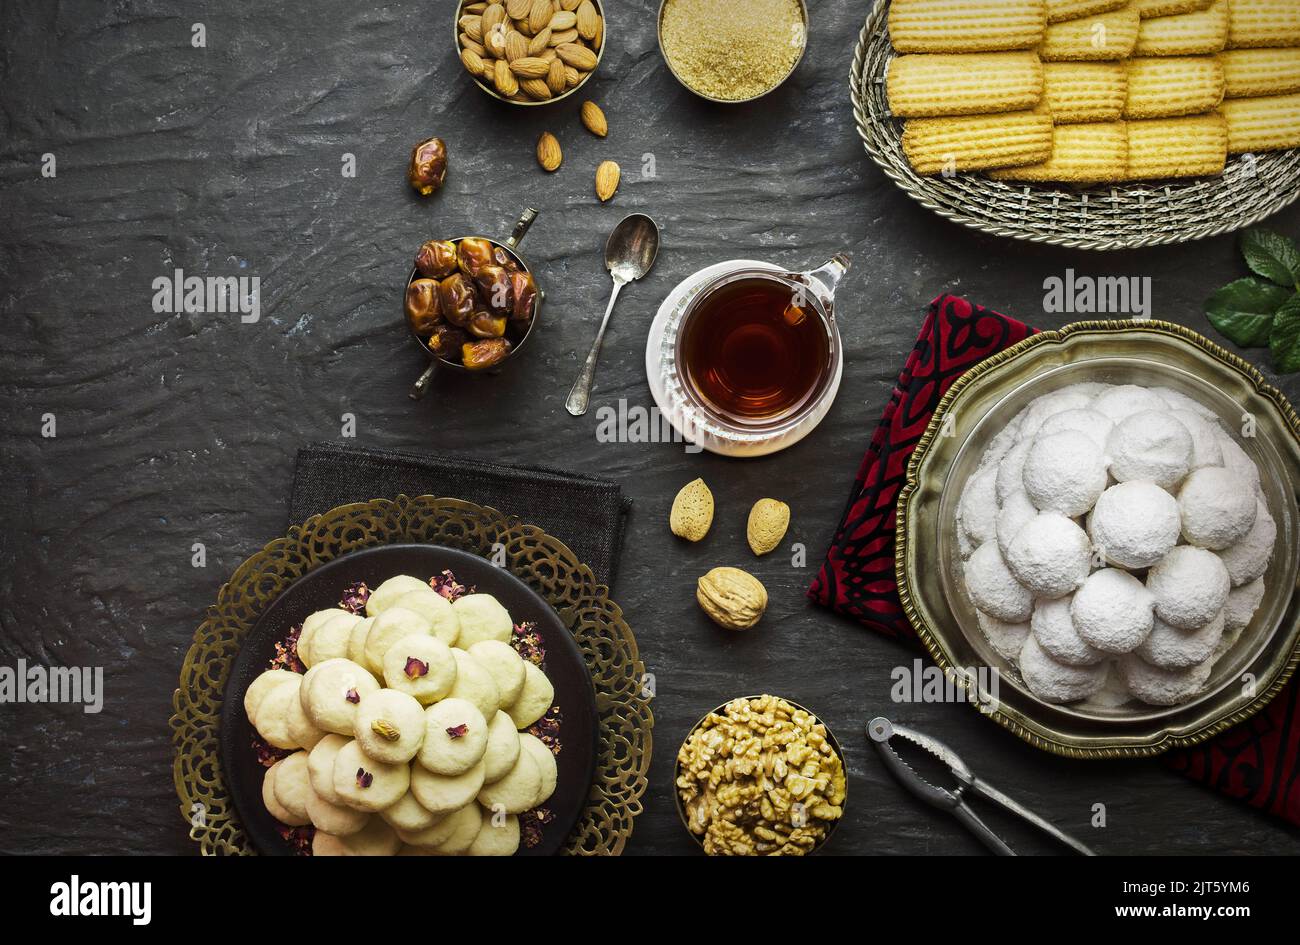 Cookies for celebration of El-Fitr Islamic Feast(The Feast that comes after Ramadan). Varities of Eid Al-Fitr sweets (Kahk-Gorayeba-Biscuits). Stock Photo